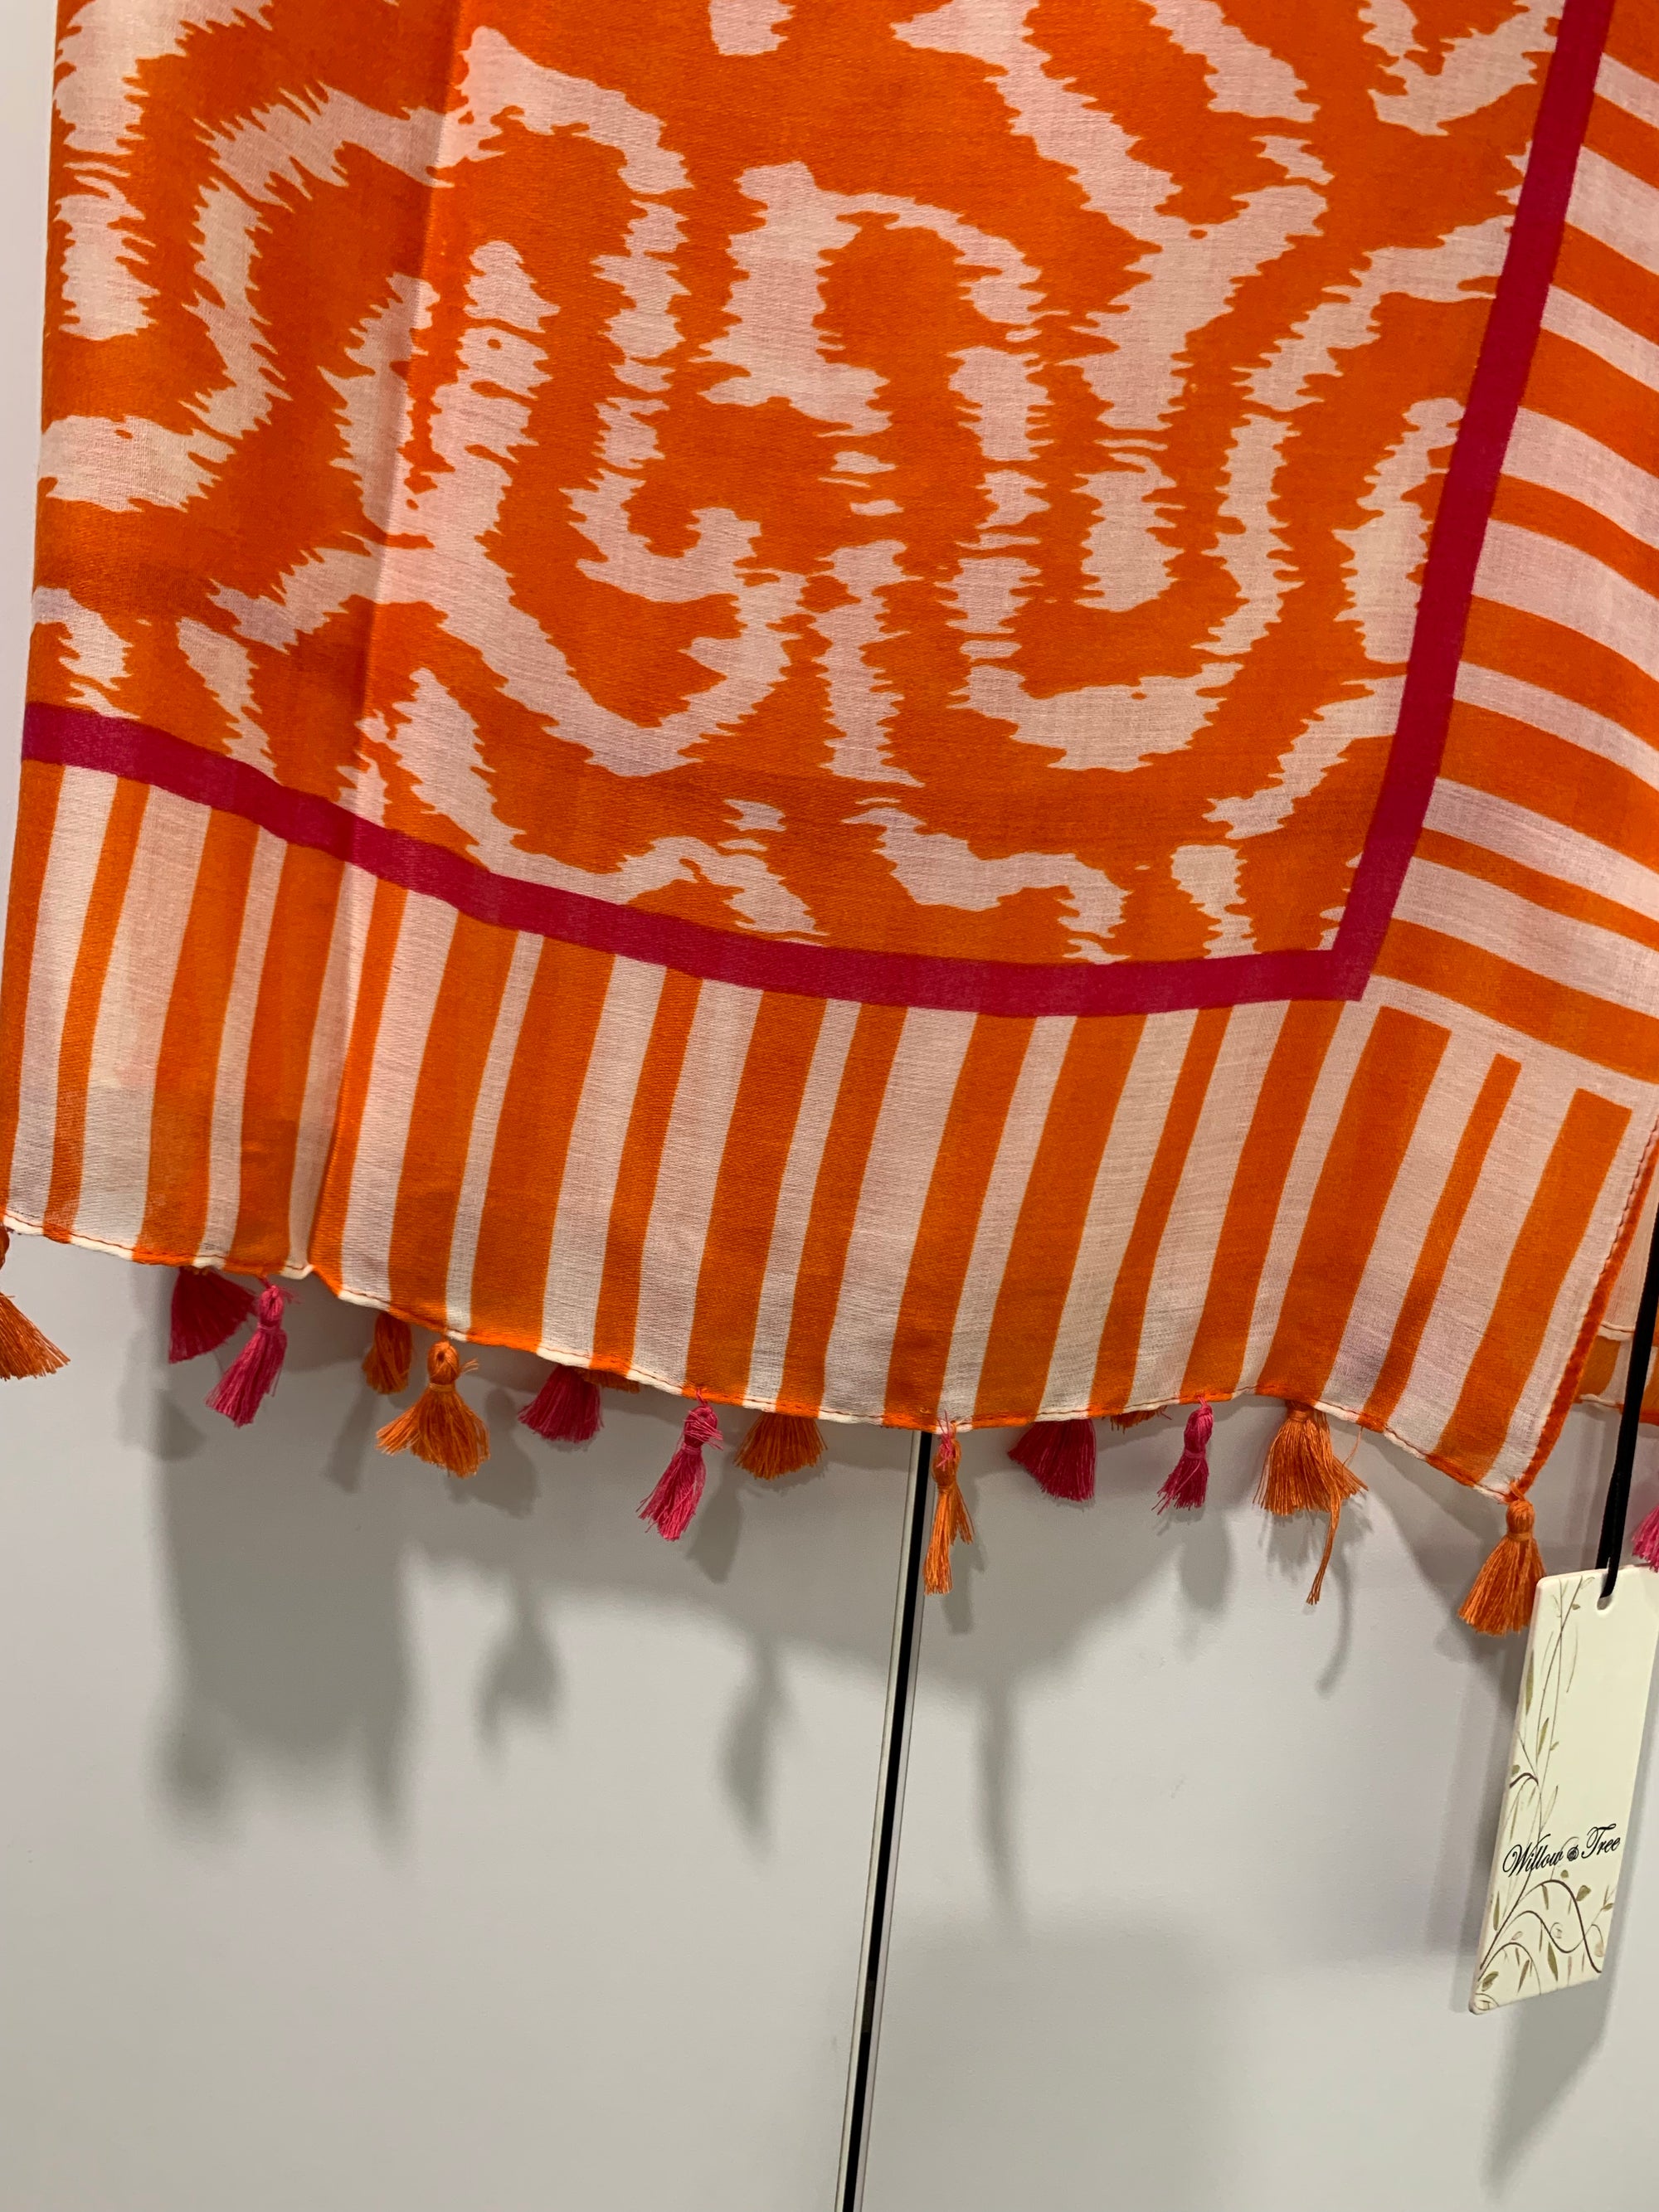 Oversized Scarf in Orange Pink & White Animal Print with Tassels - Willow Tree